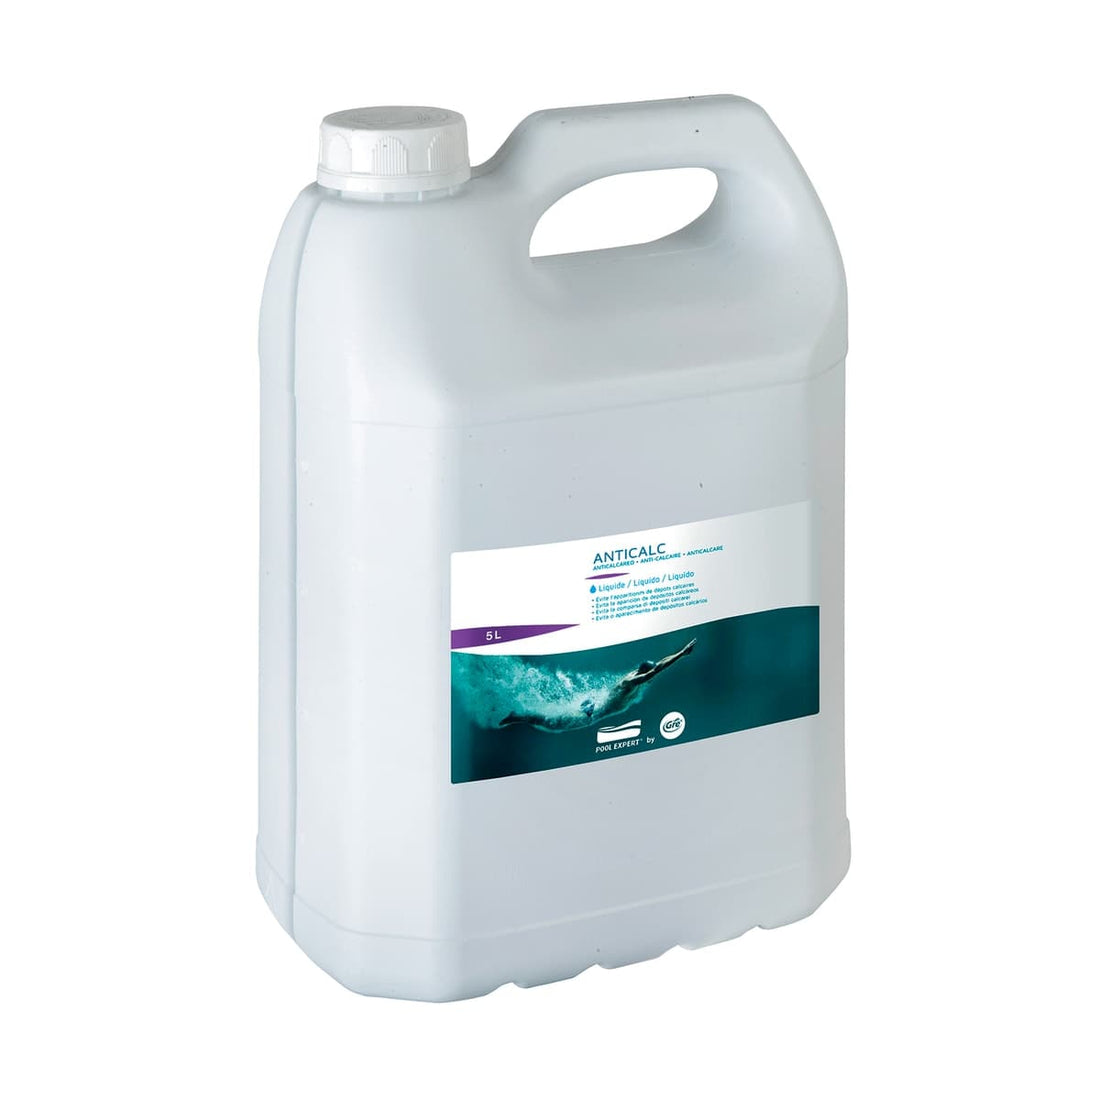 5LT POOL LIMESCALE REMOVER